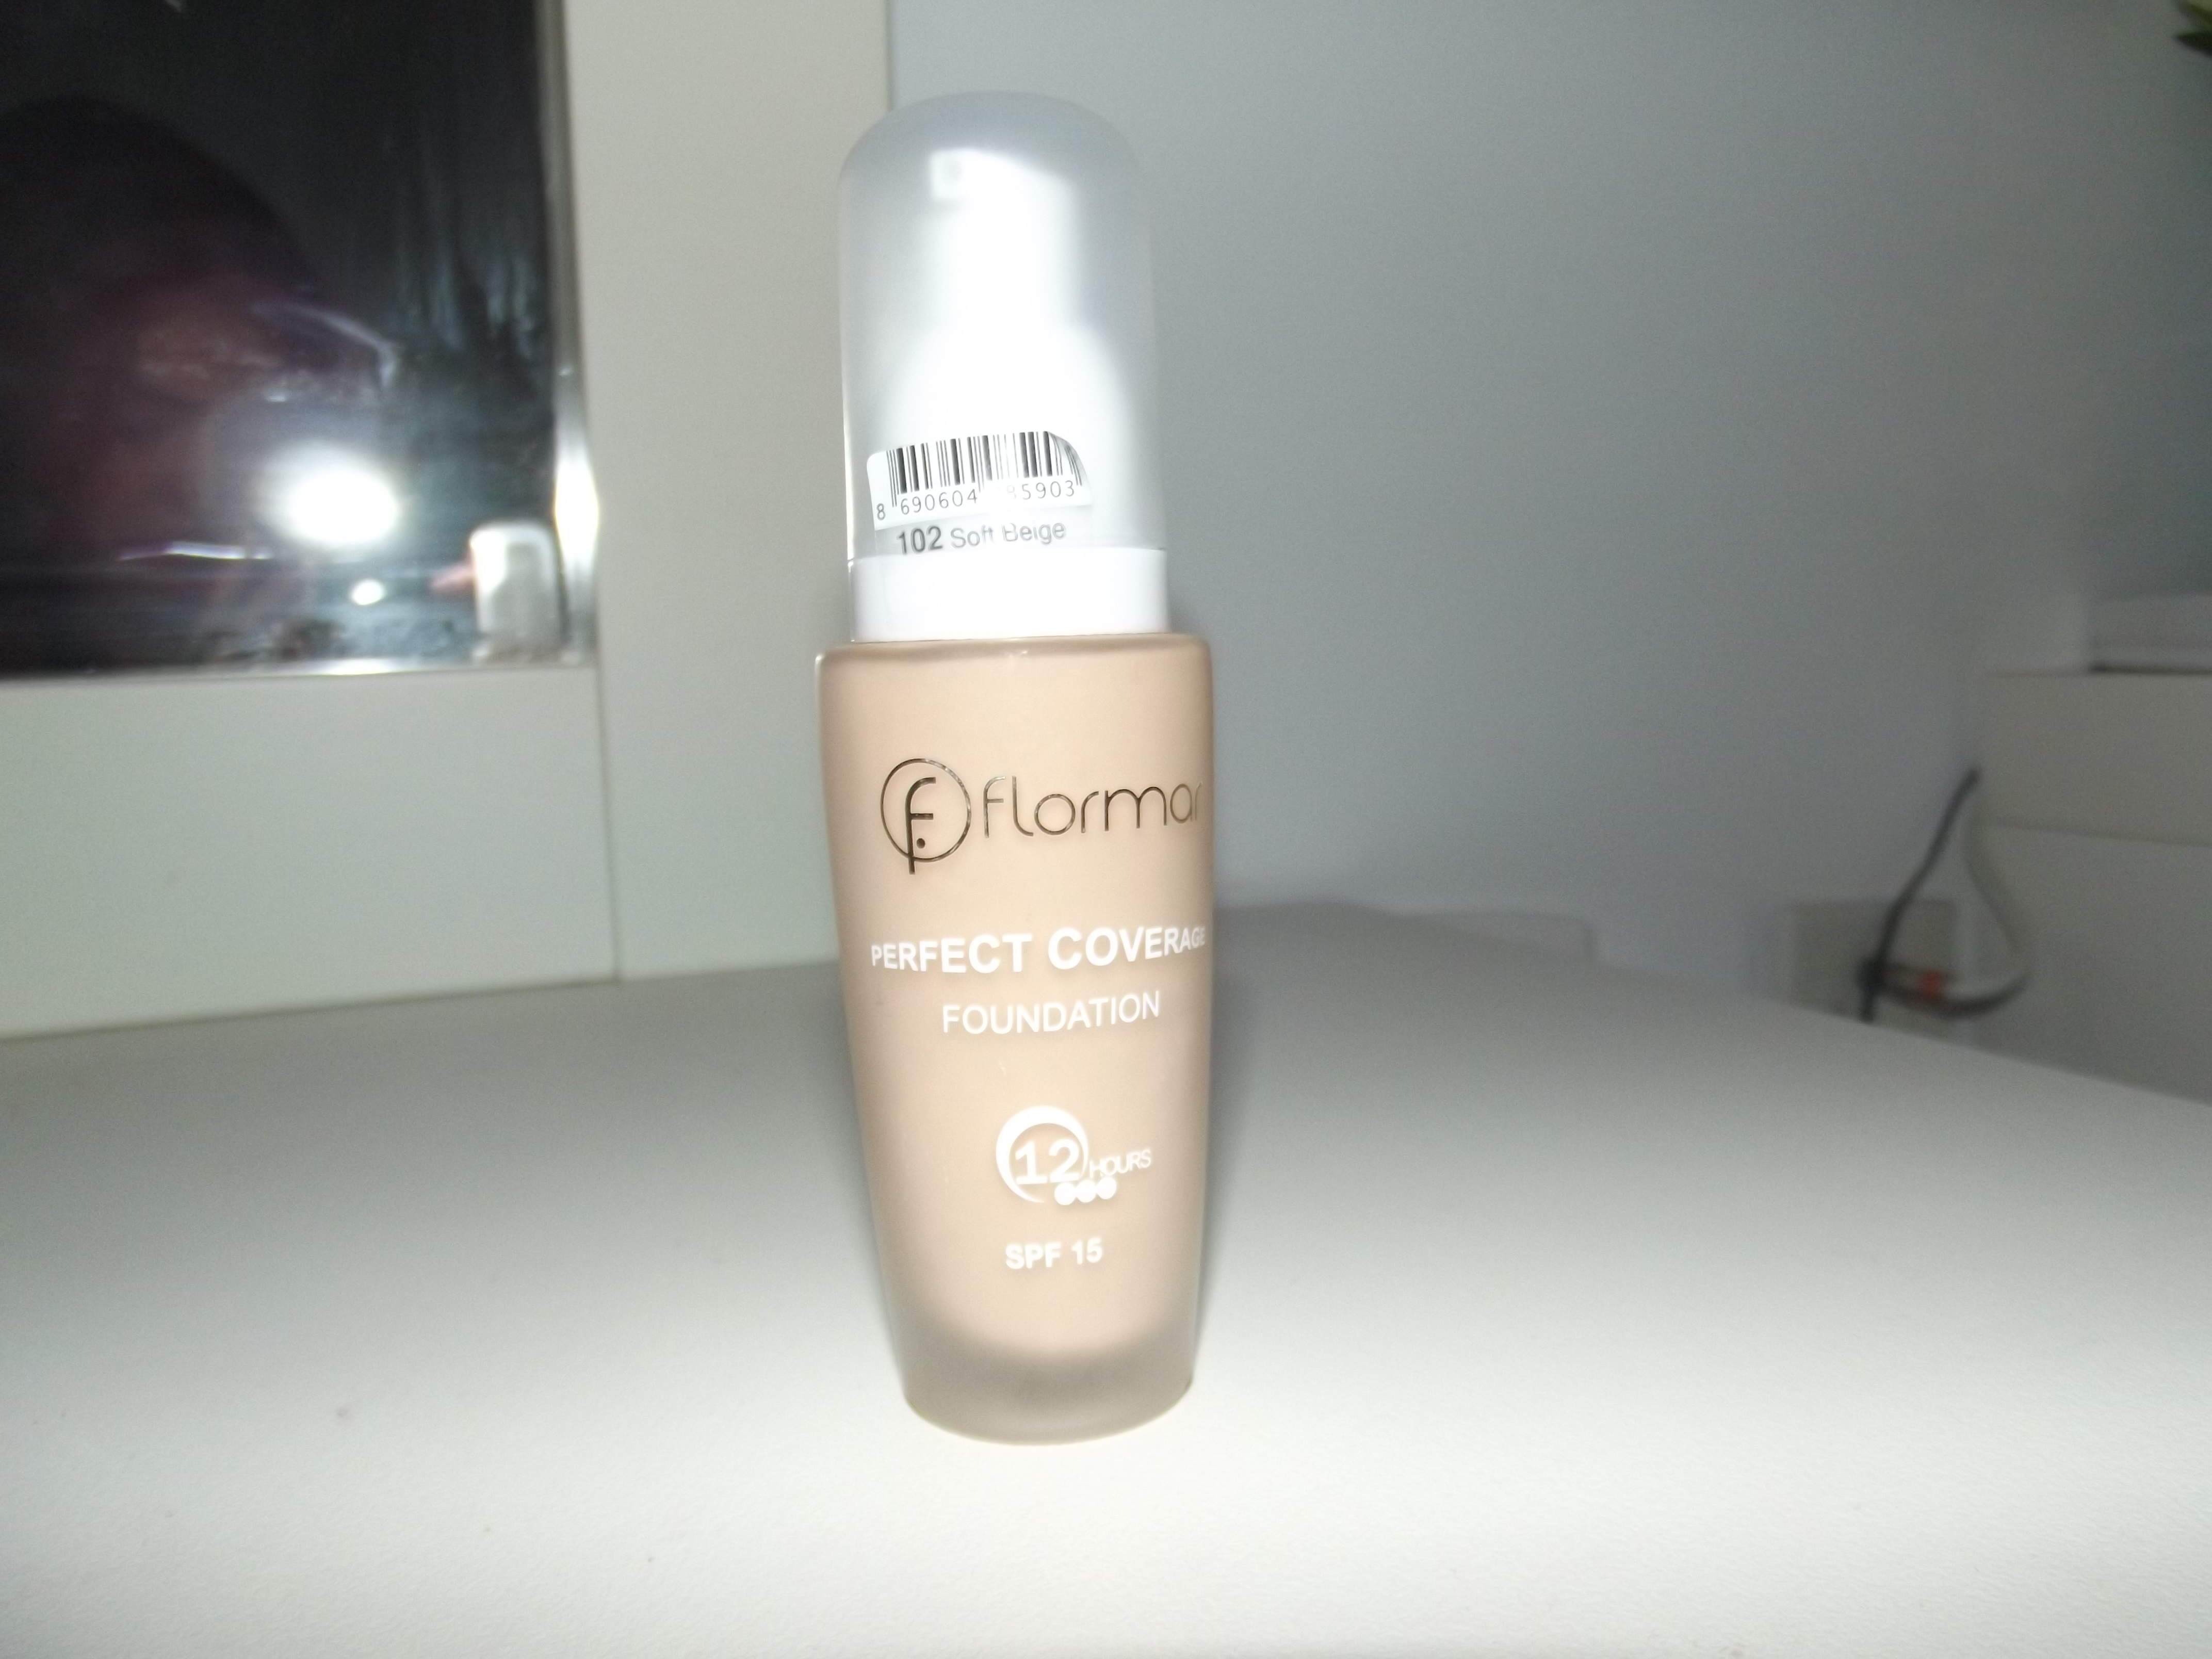 Flormar “12 HR Perfect Coverage” Foundation Review&Demo